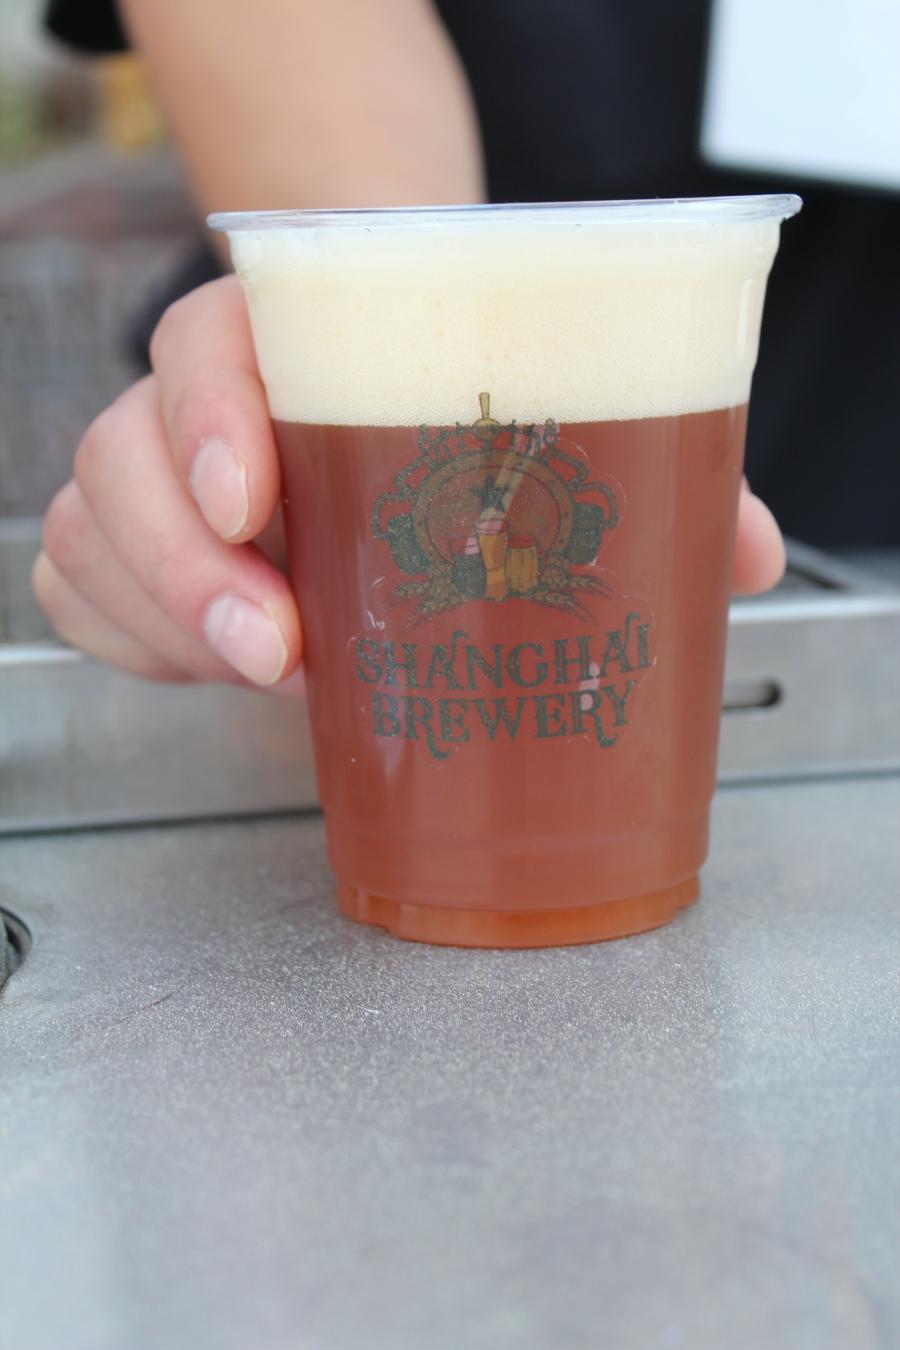 A local craft brew from Shanghai Brewery. 